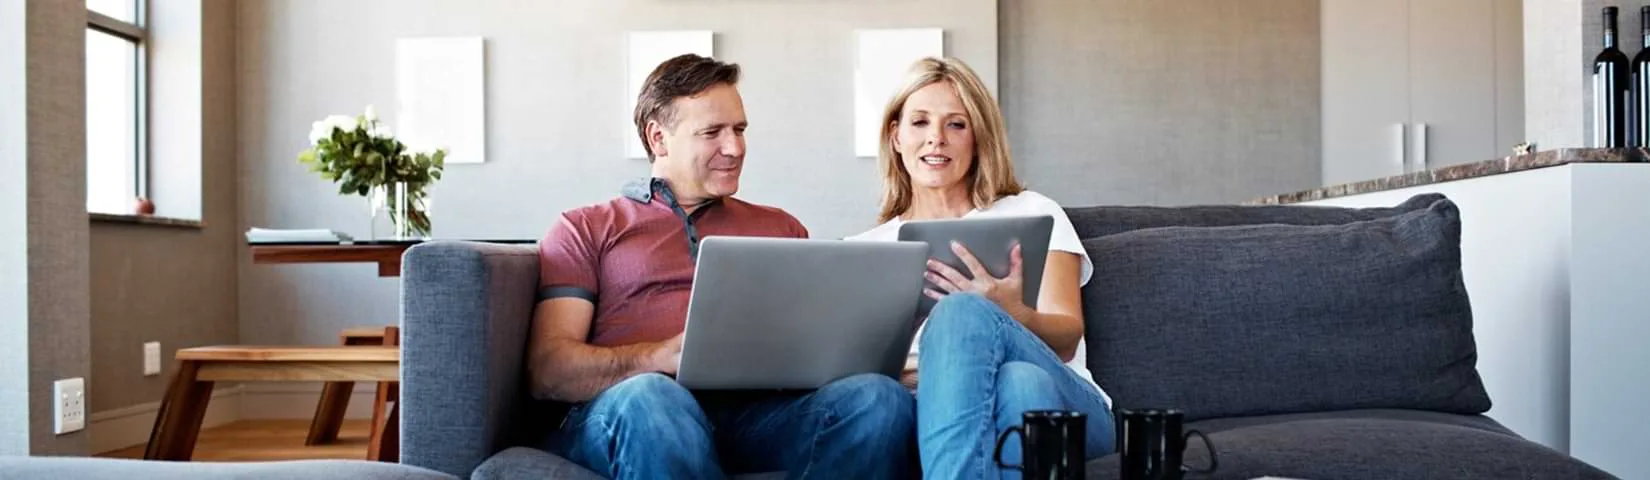 Couple using laptop and tablet.